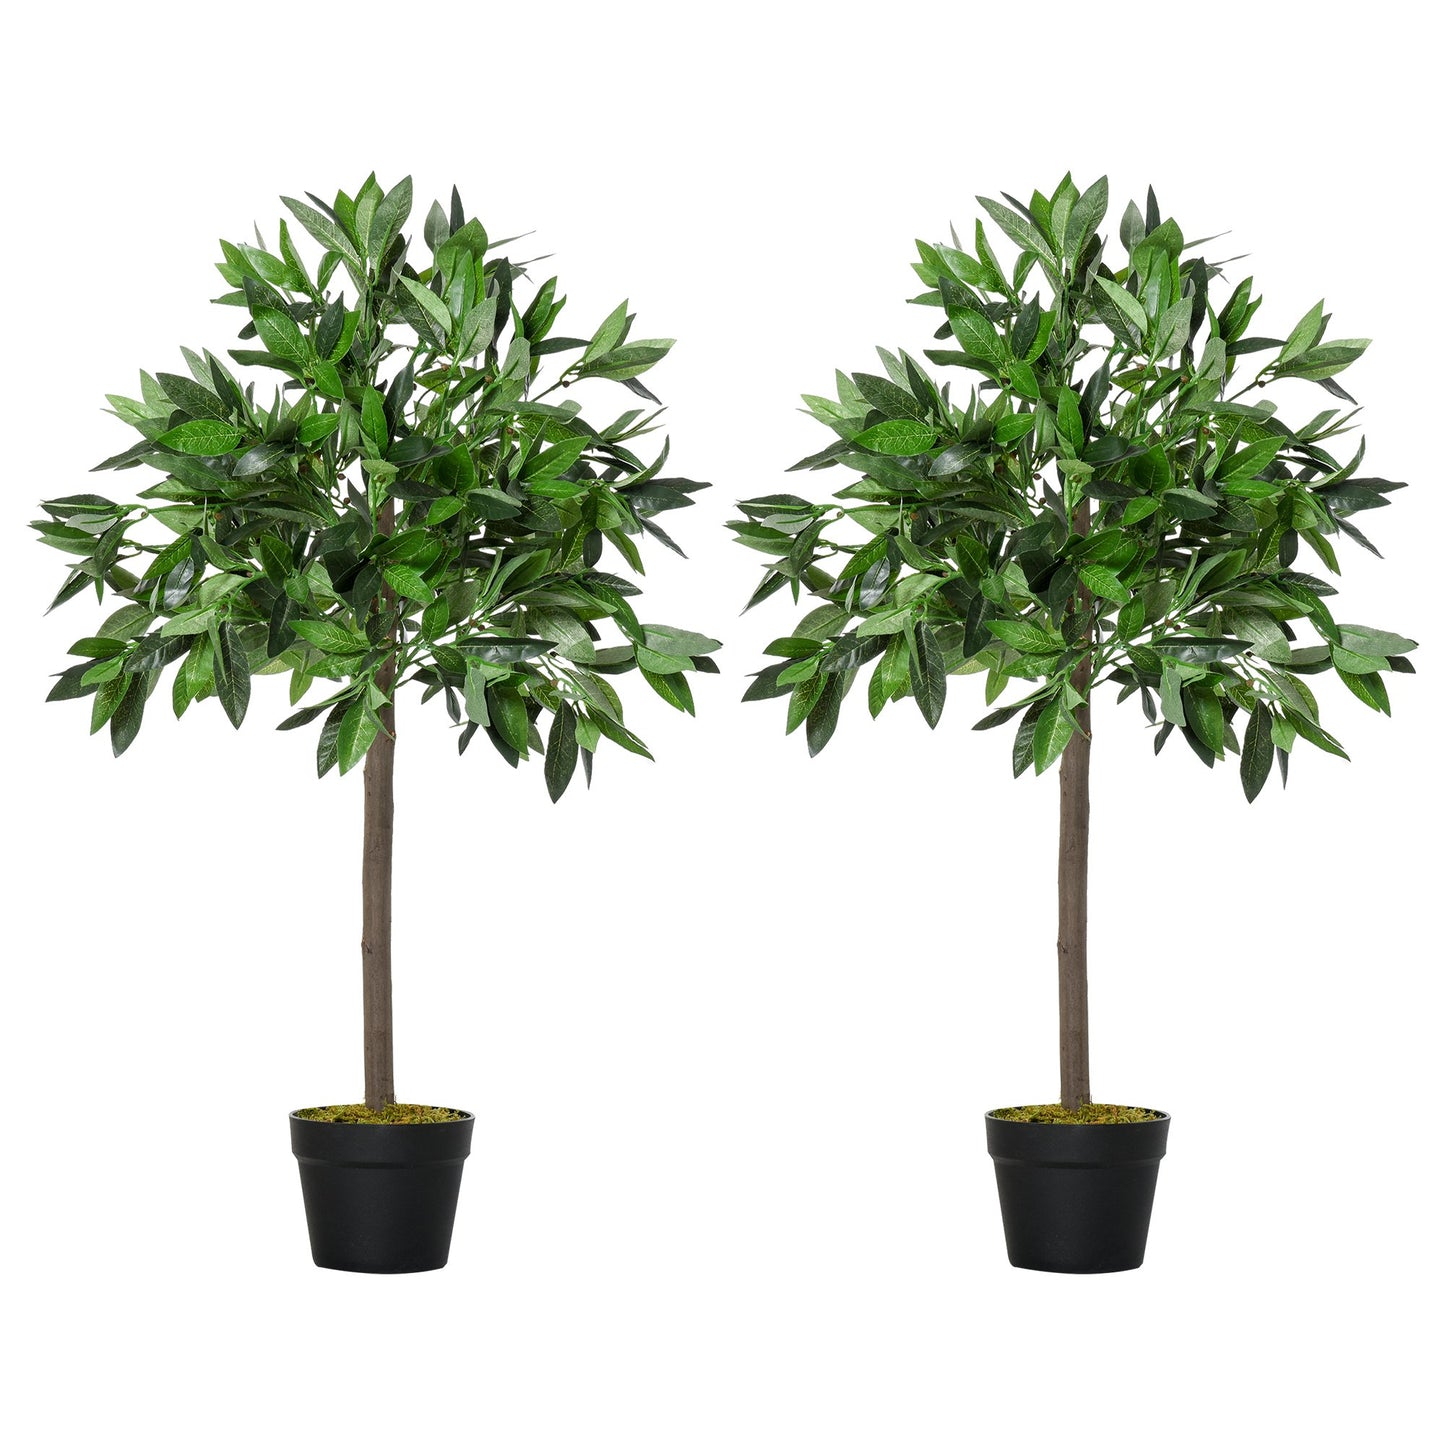 Outsunny Set of 2 Artificial Topiary Bay Laurel Ball Trees in Pot Indoor Outdoor, 90cm